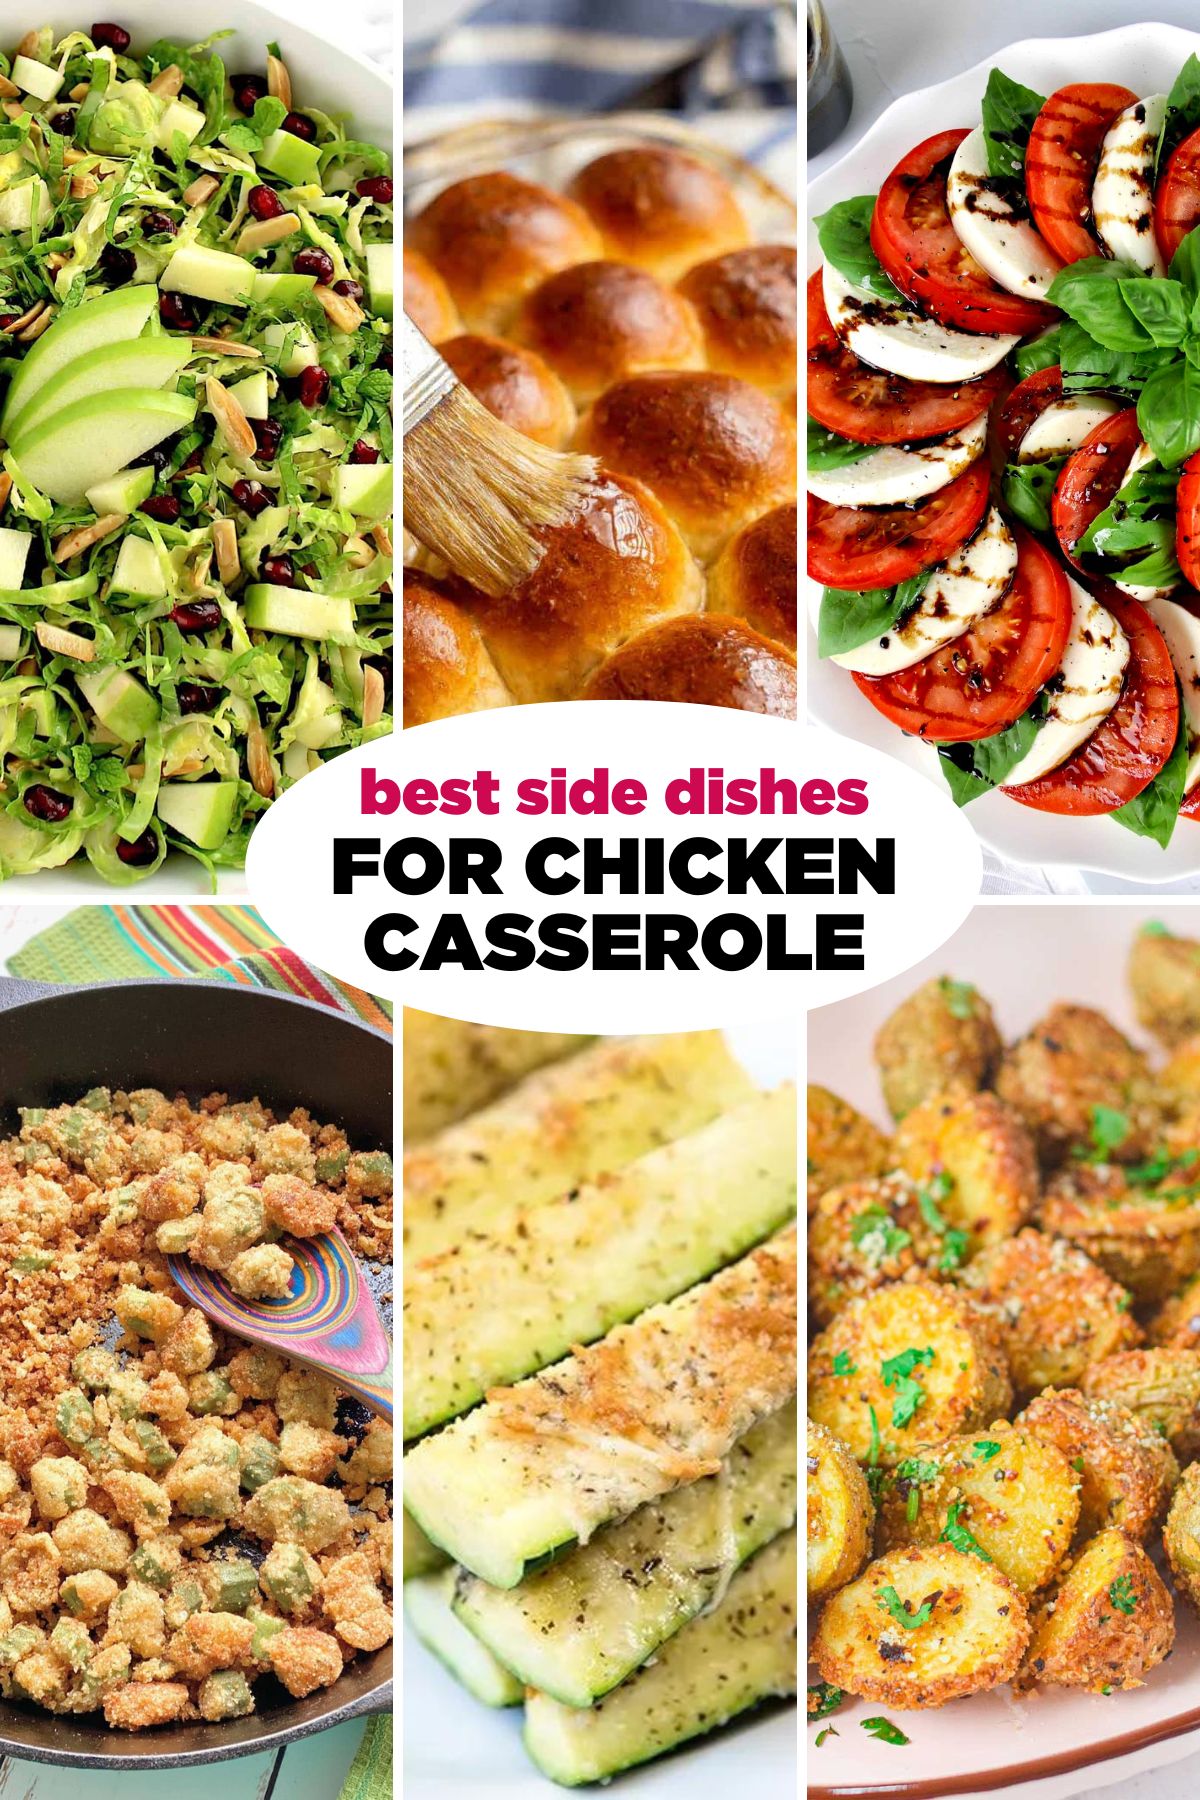 A collage showcasing a variety of side dishes recommended to pair with chicken casserole.